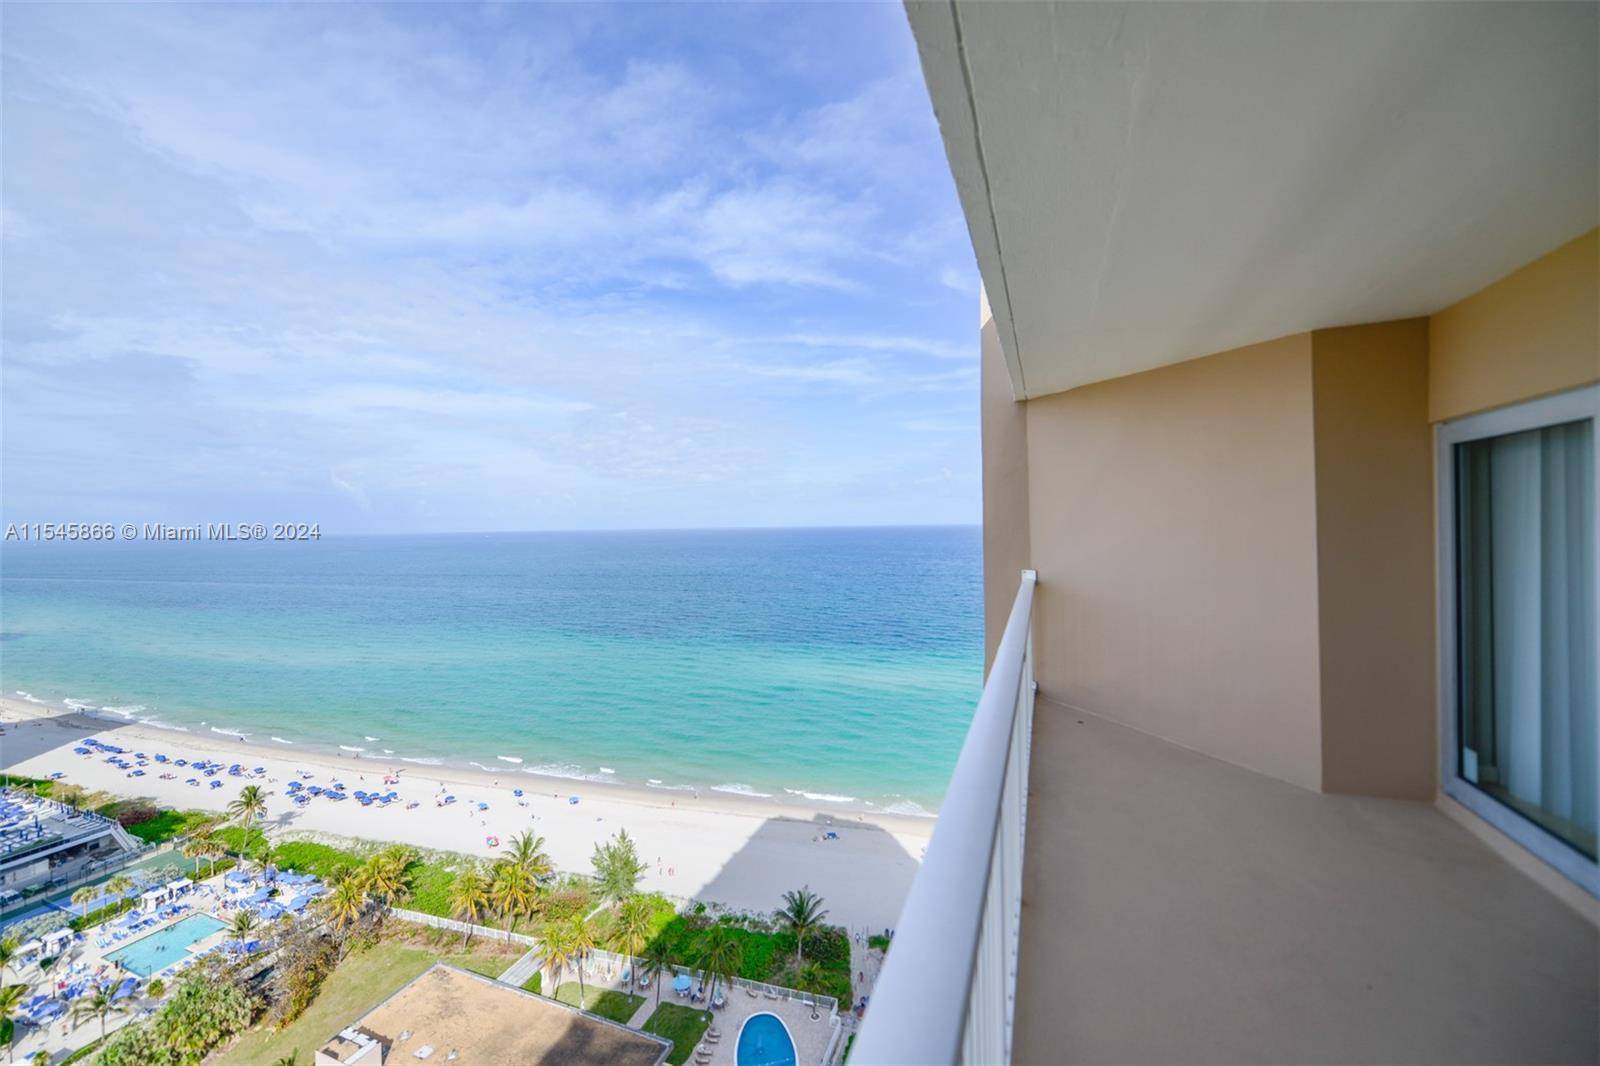 THIS BRIGHT AND SPACIOUS PENTHOUSE CONDO HAS UNOBSTRUCTED WATER VIEWS OF THE OCEAN AND IS AVAILABLE IMMEDIATELY.